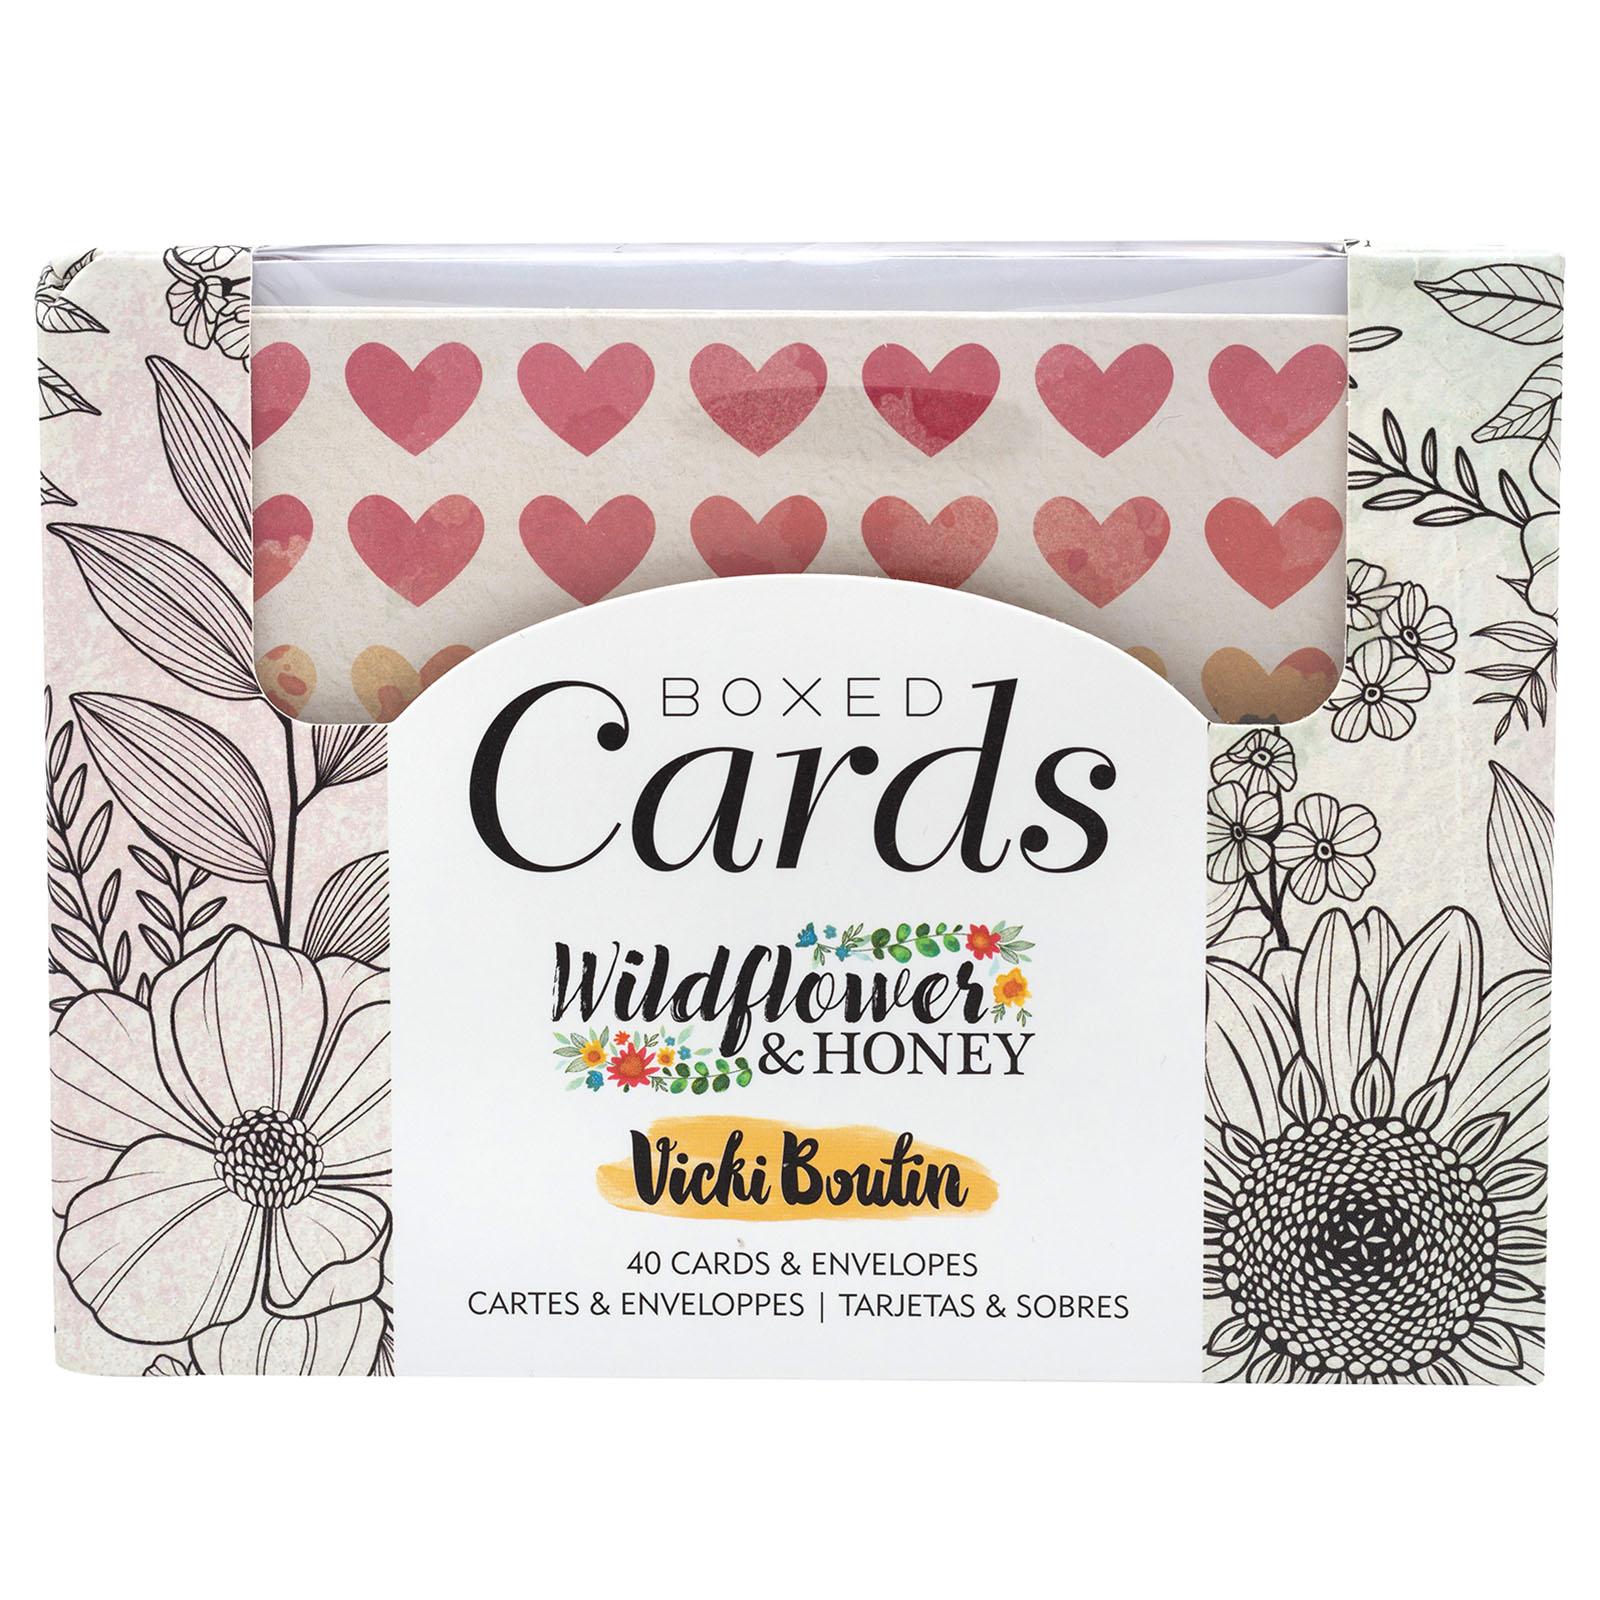 American Crafts • Wildflower & Honey boxed cards 40pcs